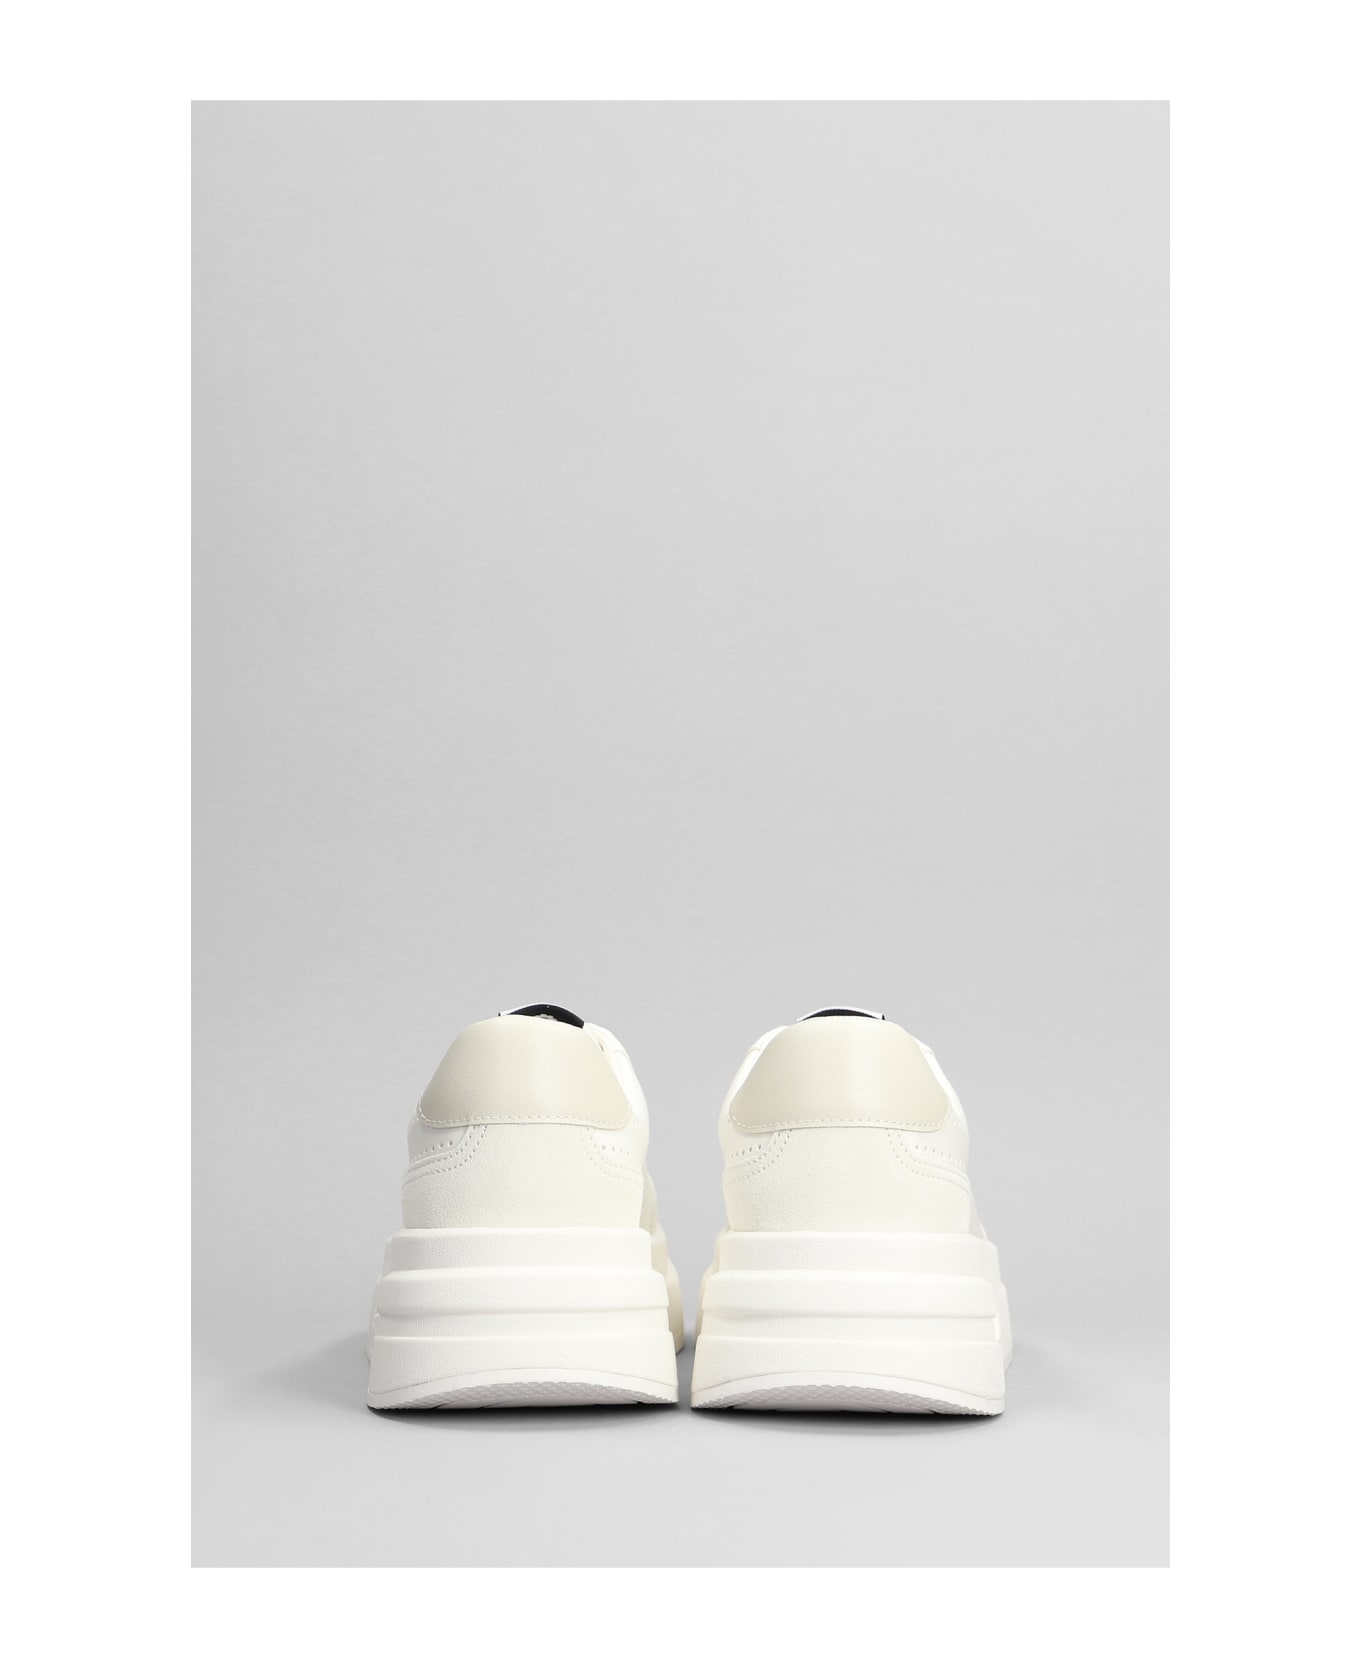 Ash Impuls Bis Sneakers In White Leather - white